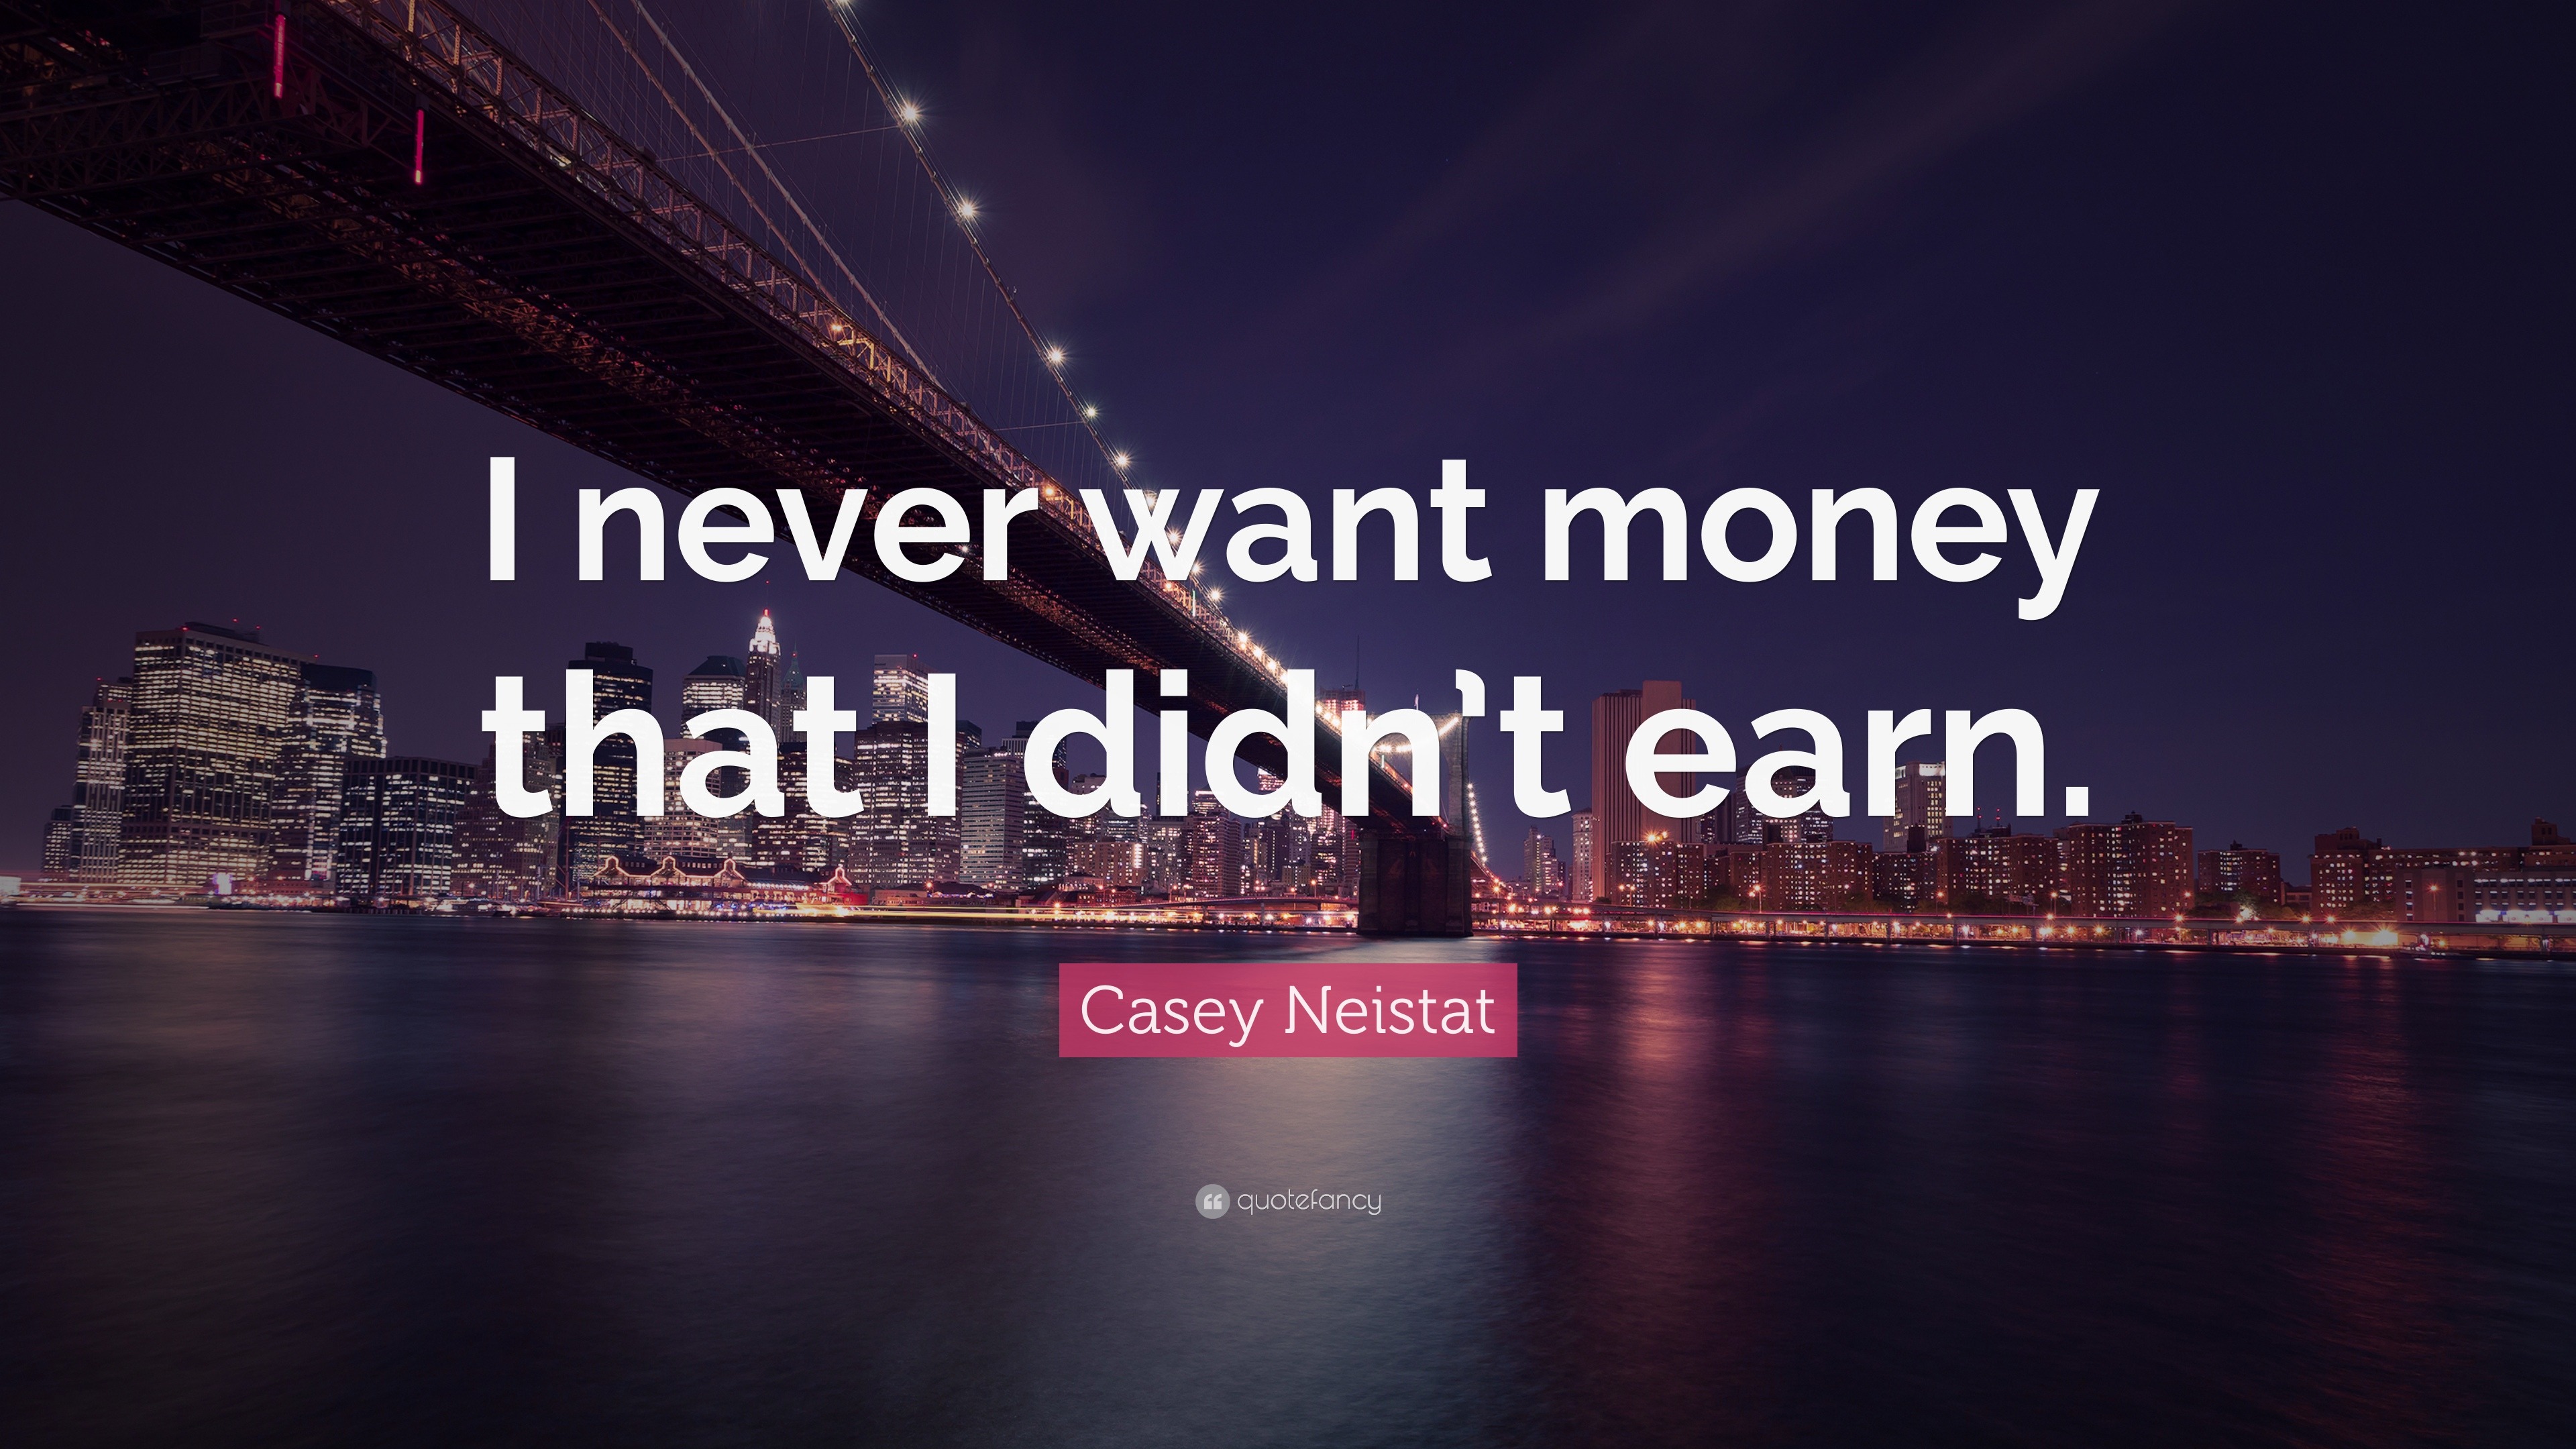 Casey Neistat Quote: "I never want money that I didn't earn." (21 wallpapers) - Quotefancy